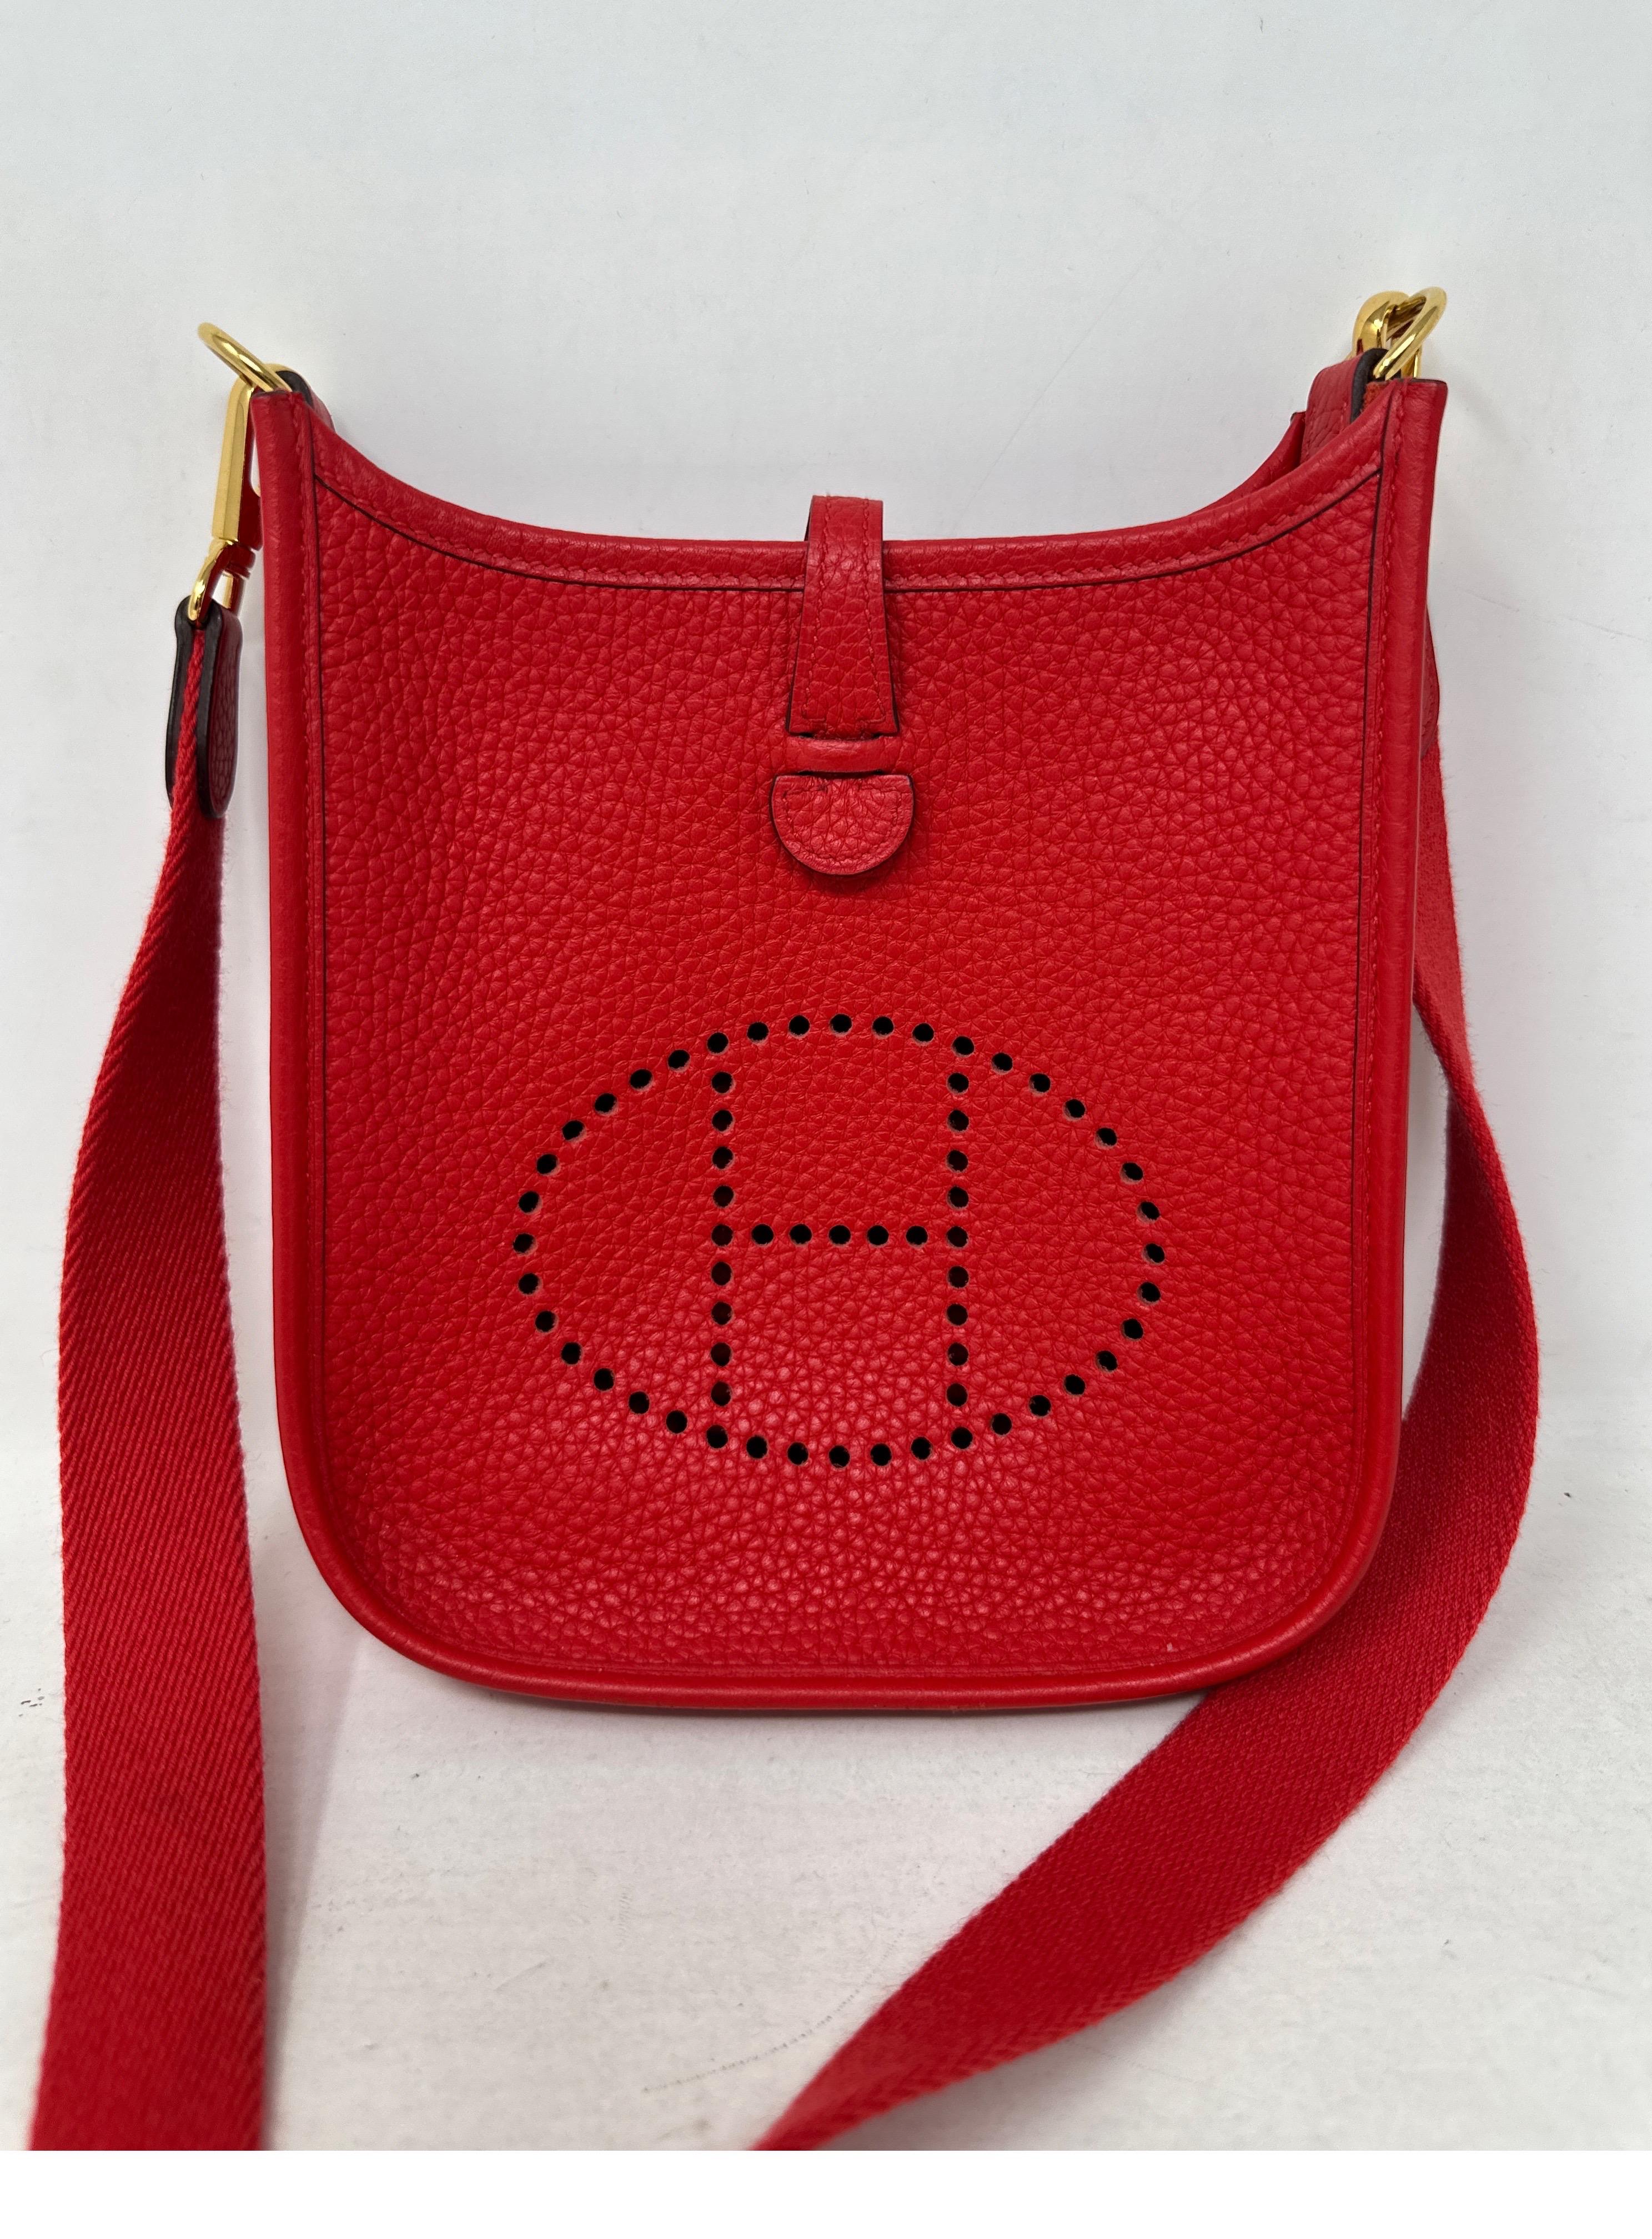 Hermes Red Evelyne TPM Bag. Mini size Evelyne. Rare red color. Gold hardware. Excellent condition. Interior clean. Hard to get mini size. Includes dust bag. Guaranteed authentic. 